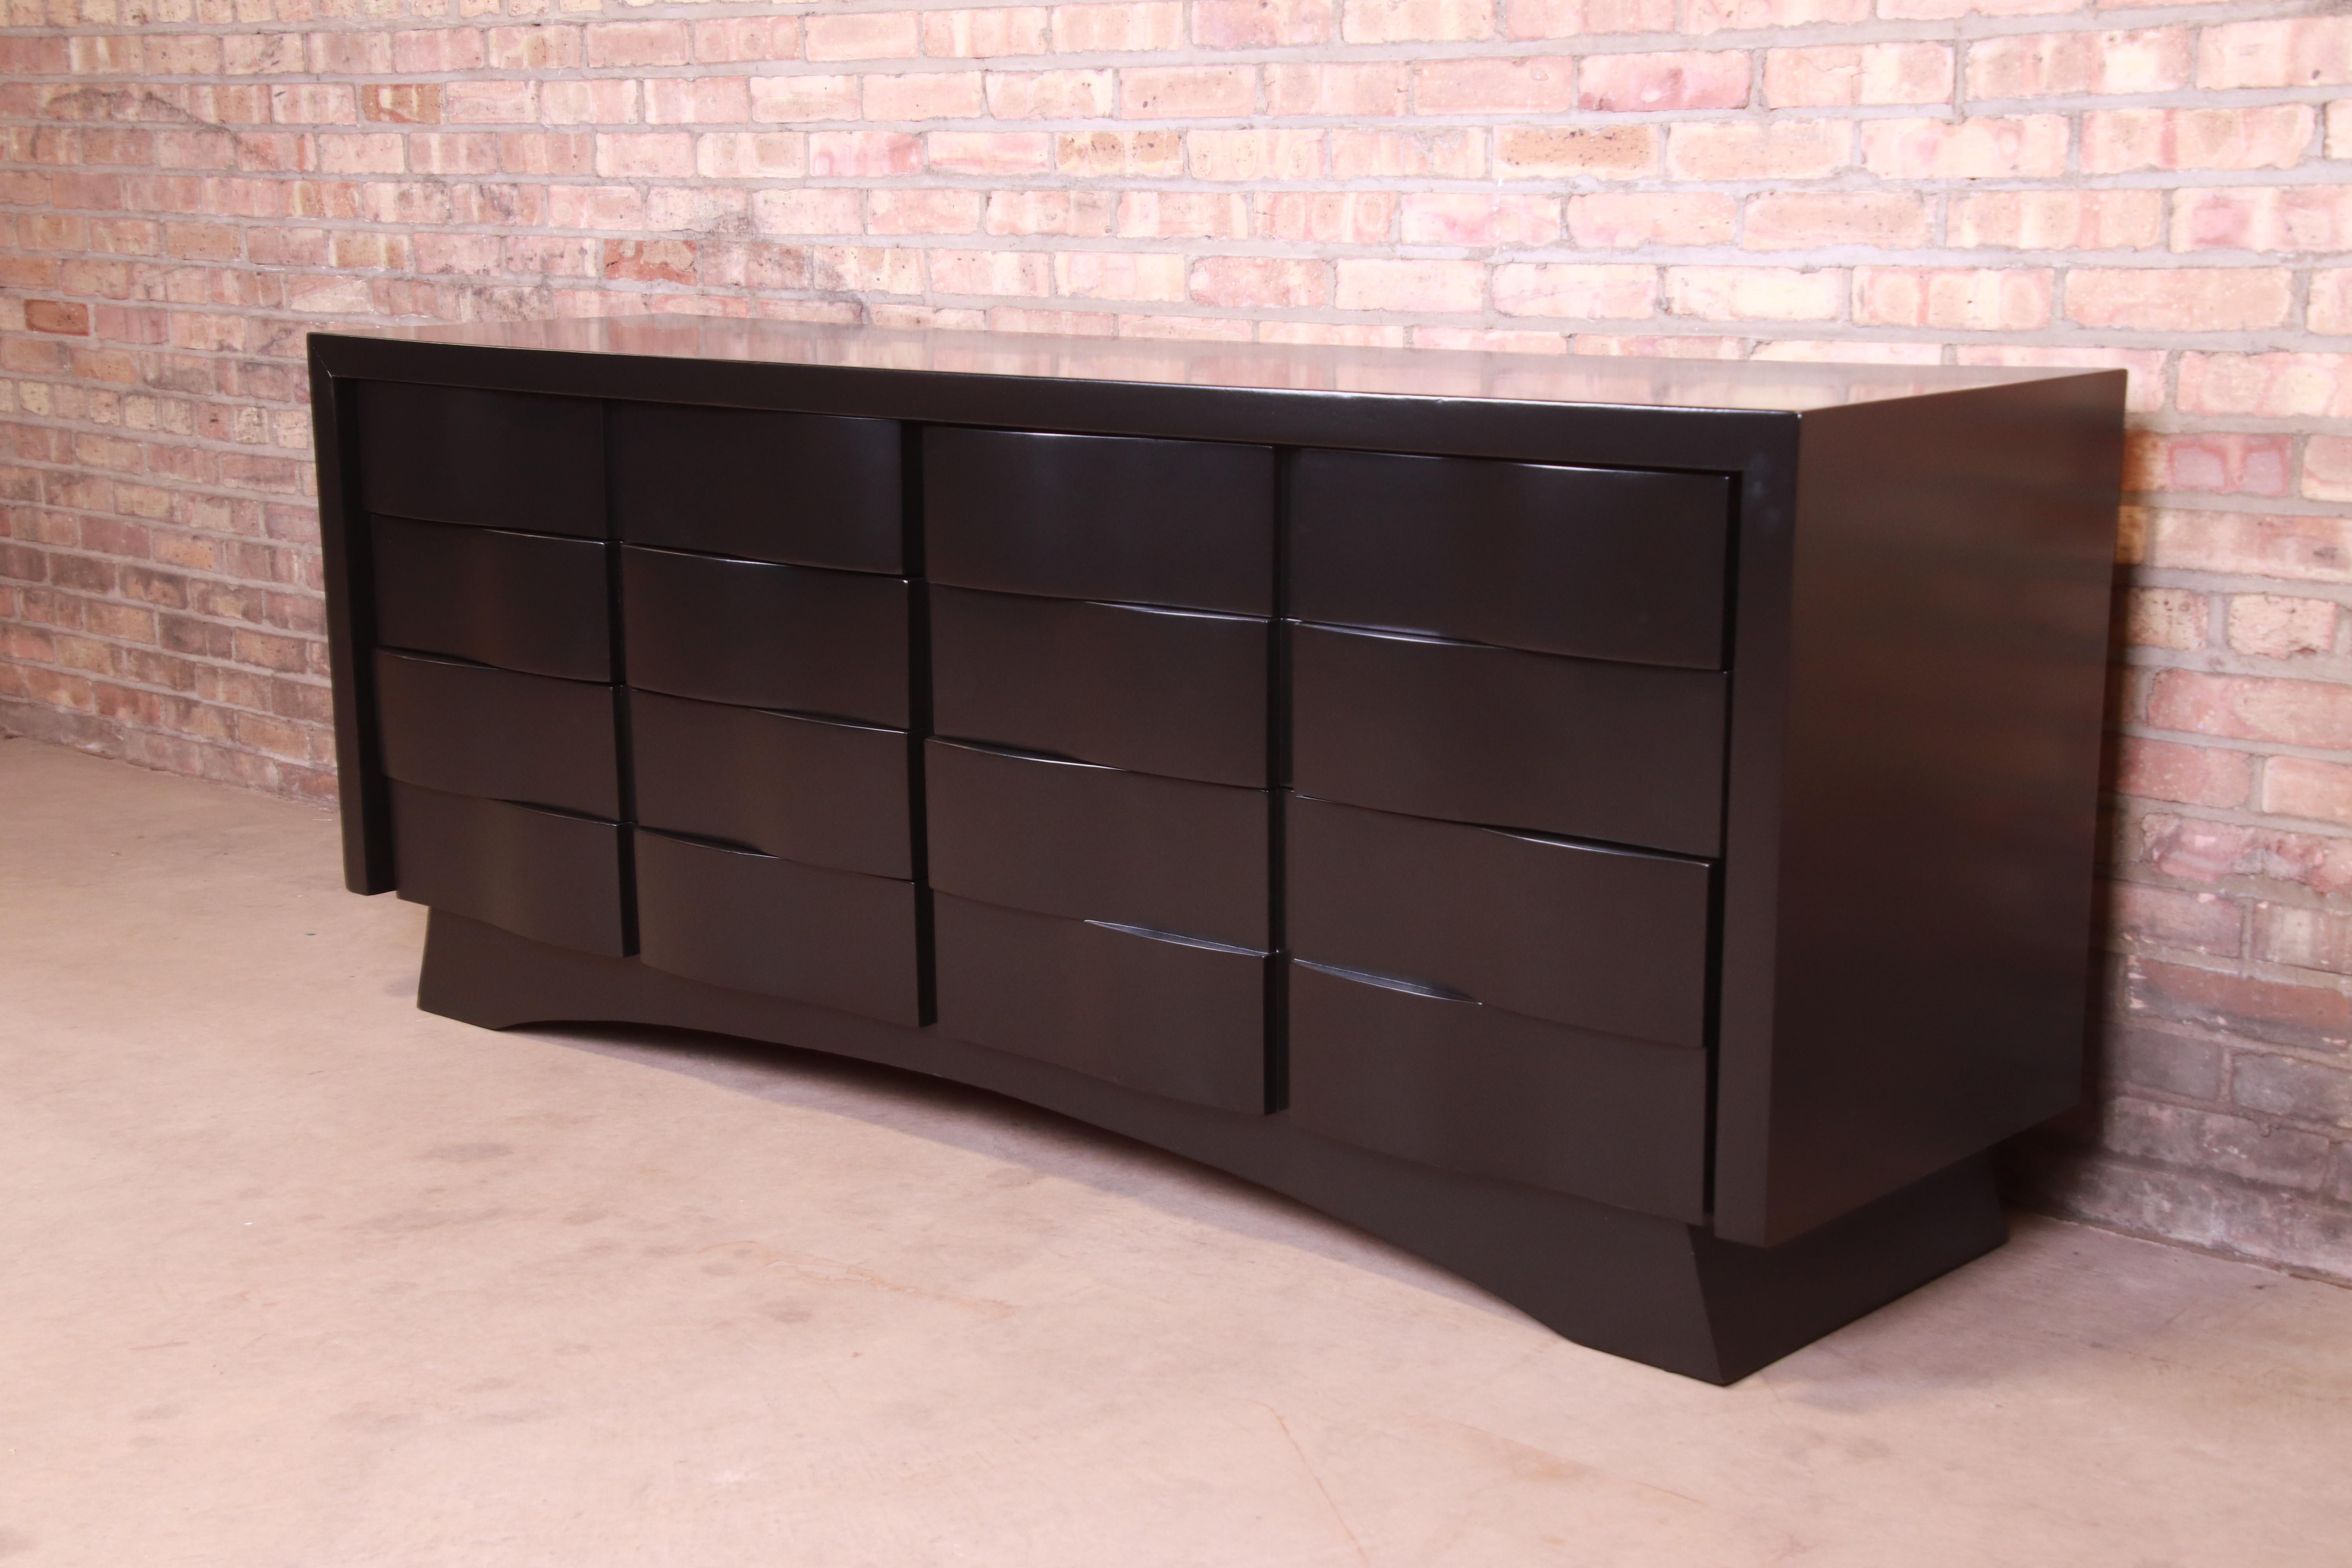 An exceptional Mid-Century Modern sculpted wave front black lacquered long dresser or credenza

In the manner of Edmond J. Spence

Mid-20th century

Measures: 76.63